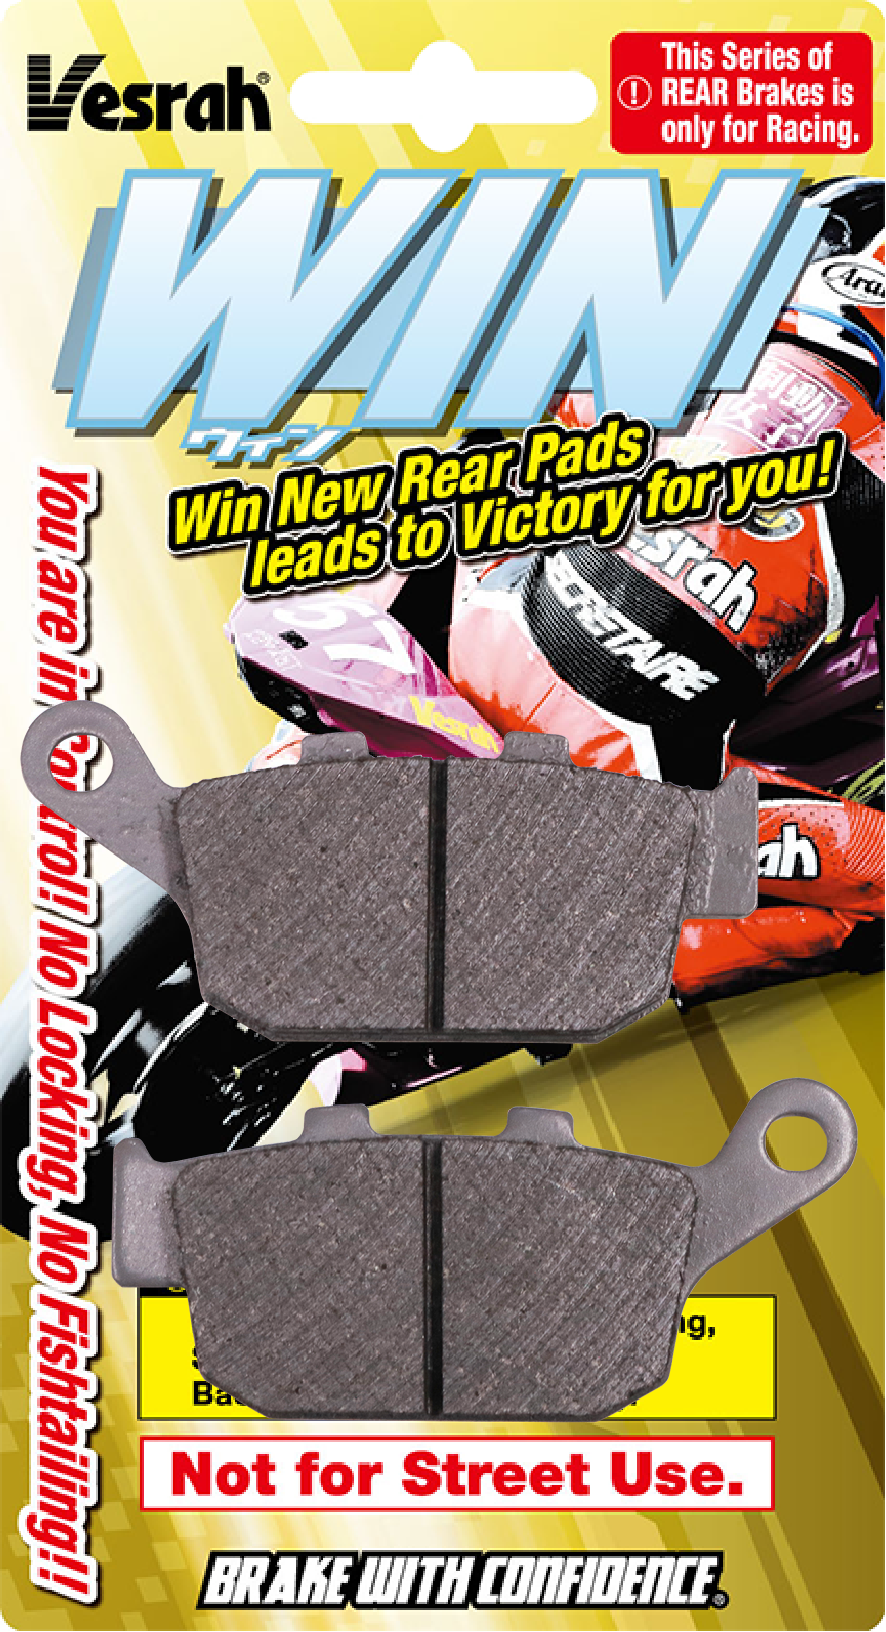 Vesrah "Win"  Rear Pads Race ( Not for Street Use )